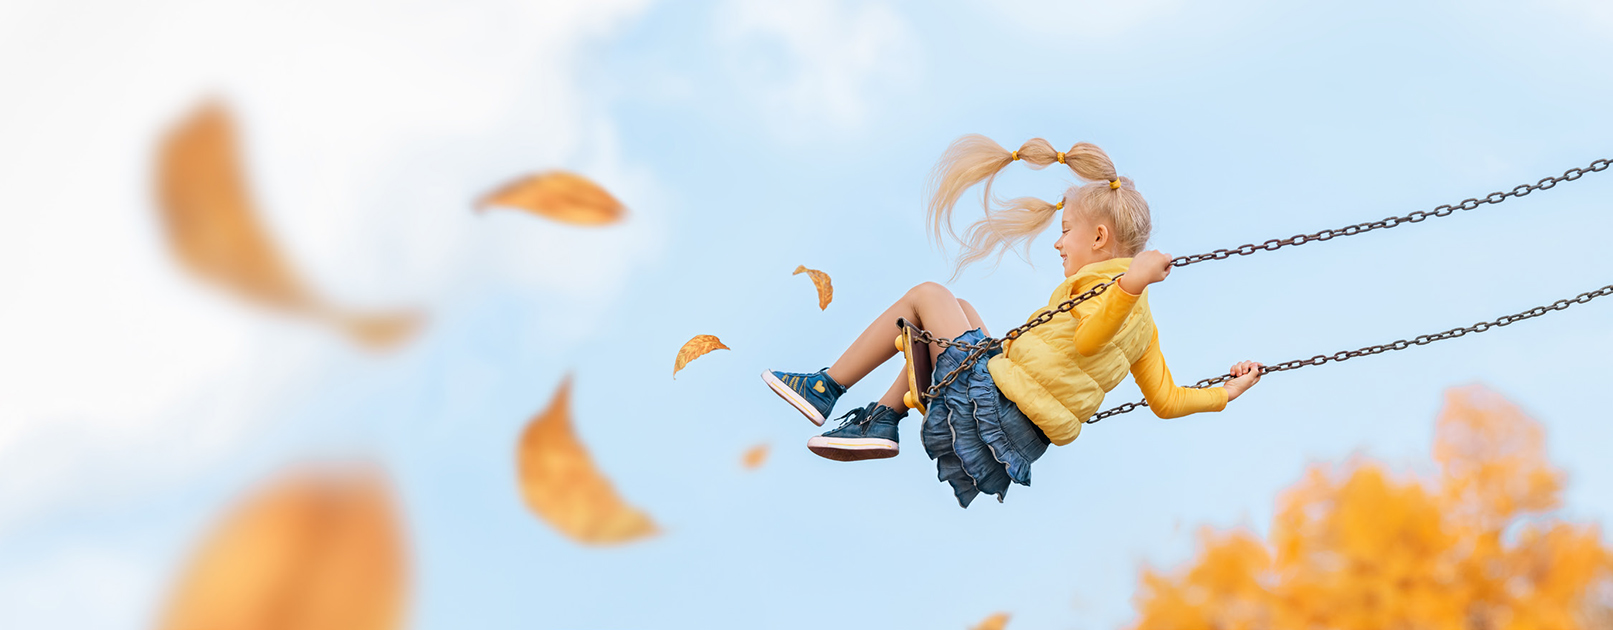 Girl on a swing with autumn foliage